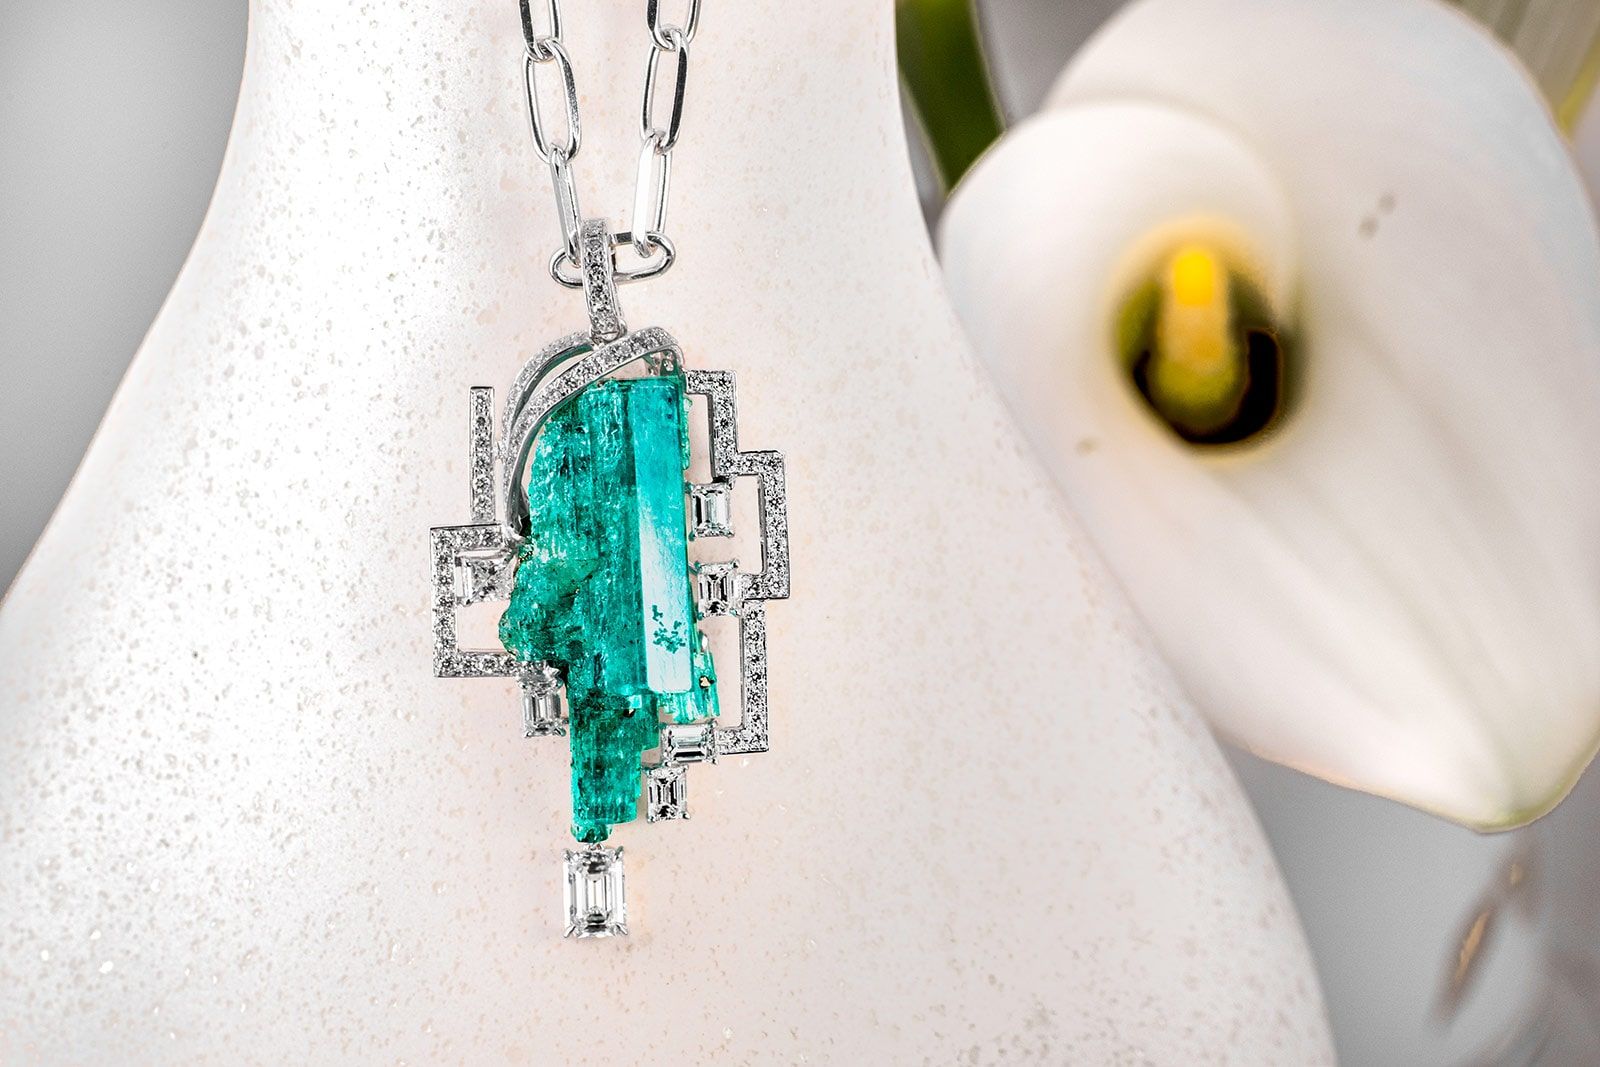 Qiu Fine Jewelry necklace with a 42 carat rough Colombian emerald in a diamond-set geometric frame